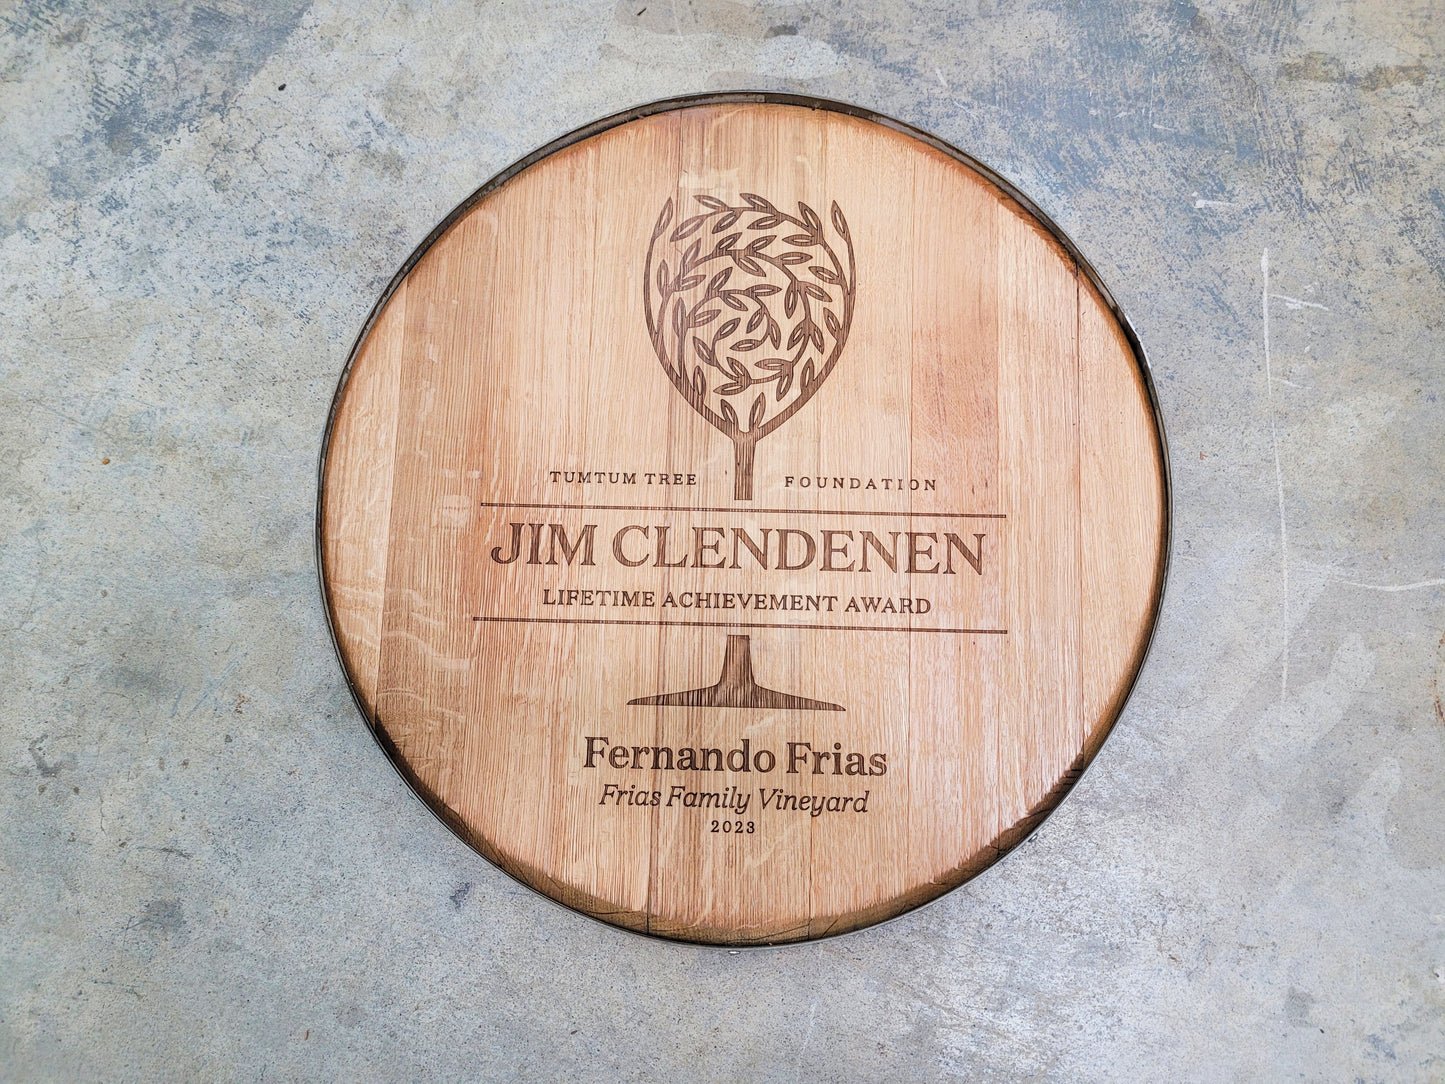 Wine Barrel Personalized Wall Art or Wedding Guestbook - Signo - made from Retired California wine barrel head with custom engraving